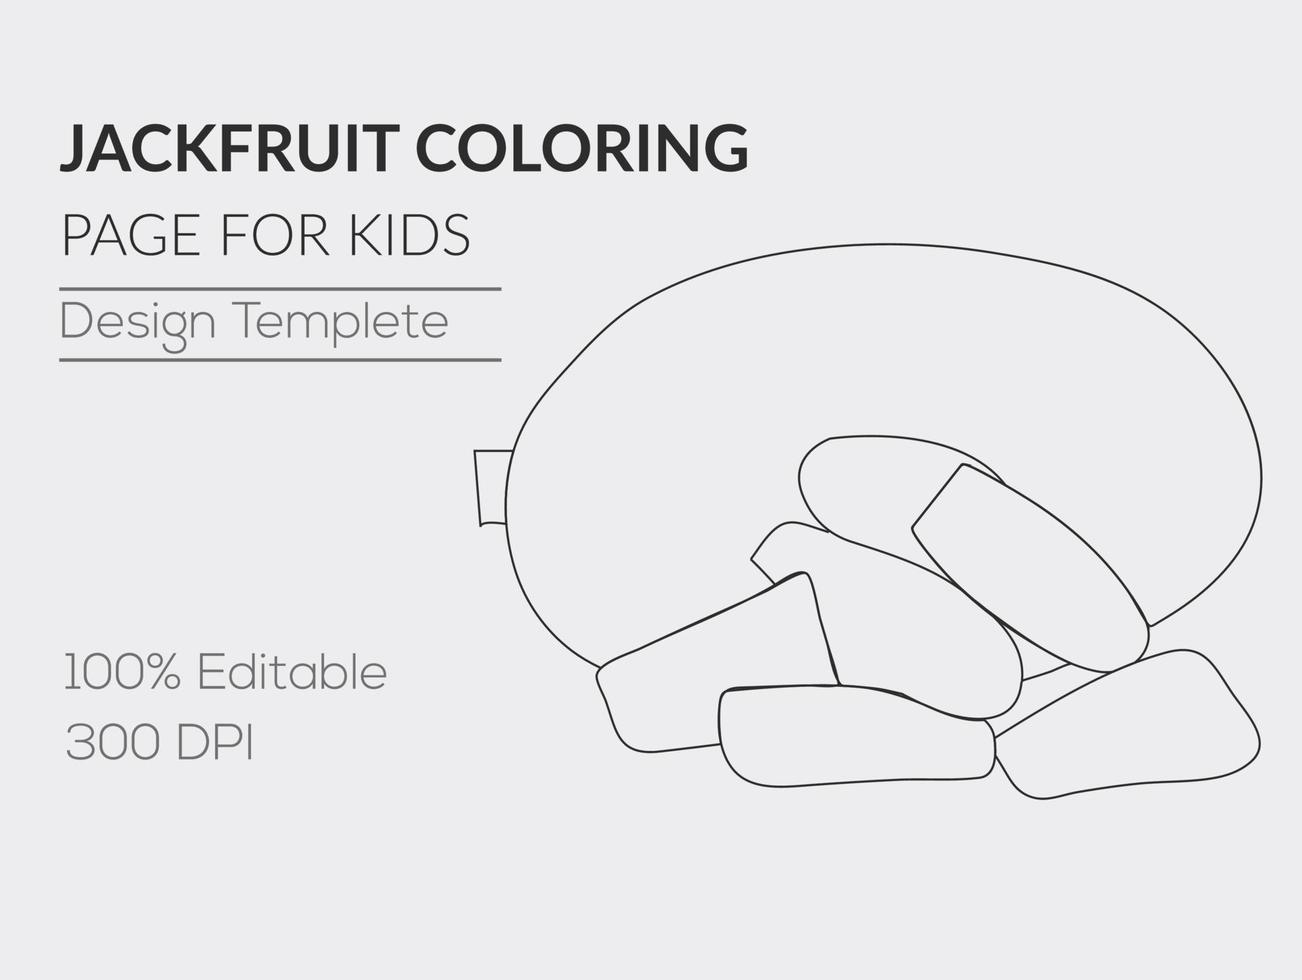 JACKFRUIT COLORING  PAGE FOR KIDS vector